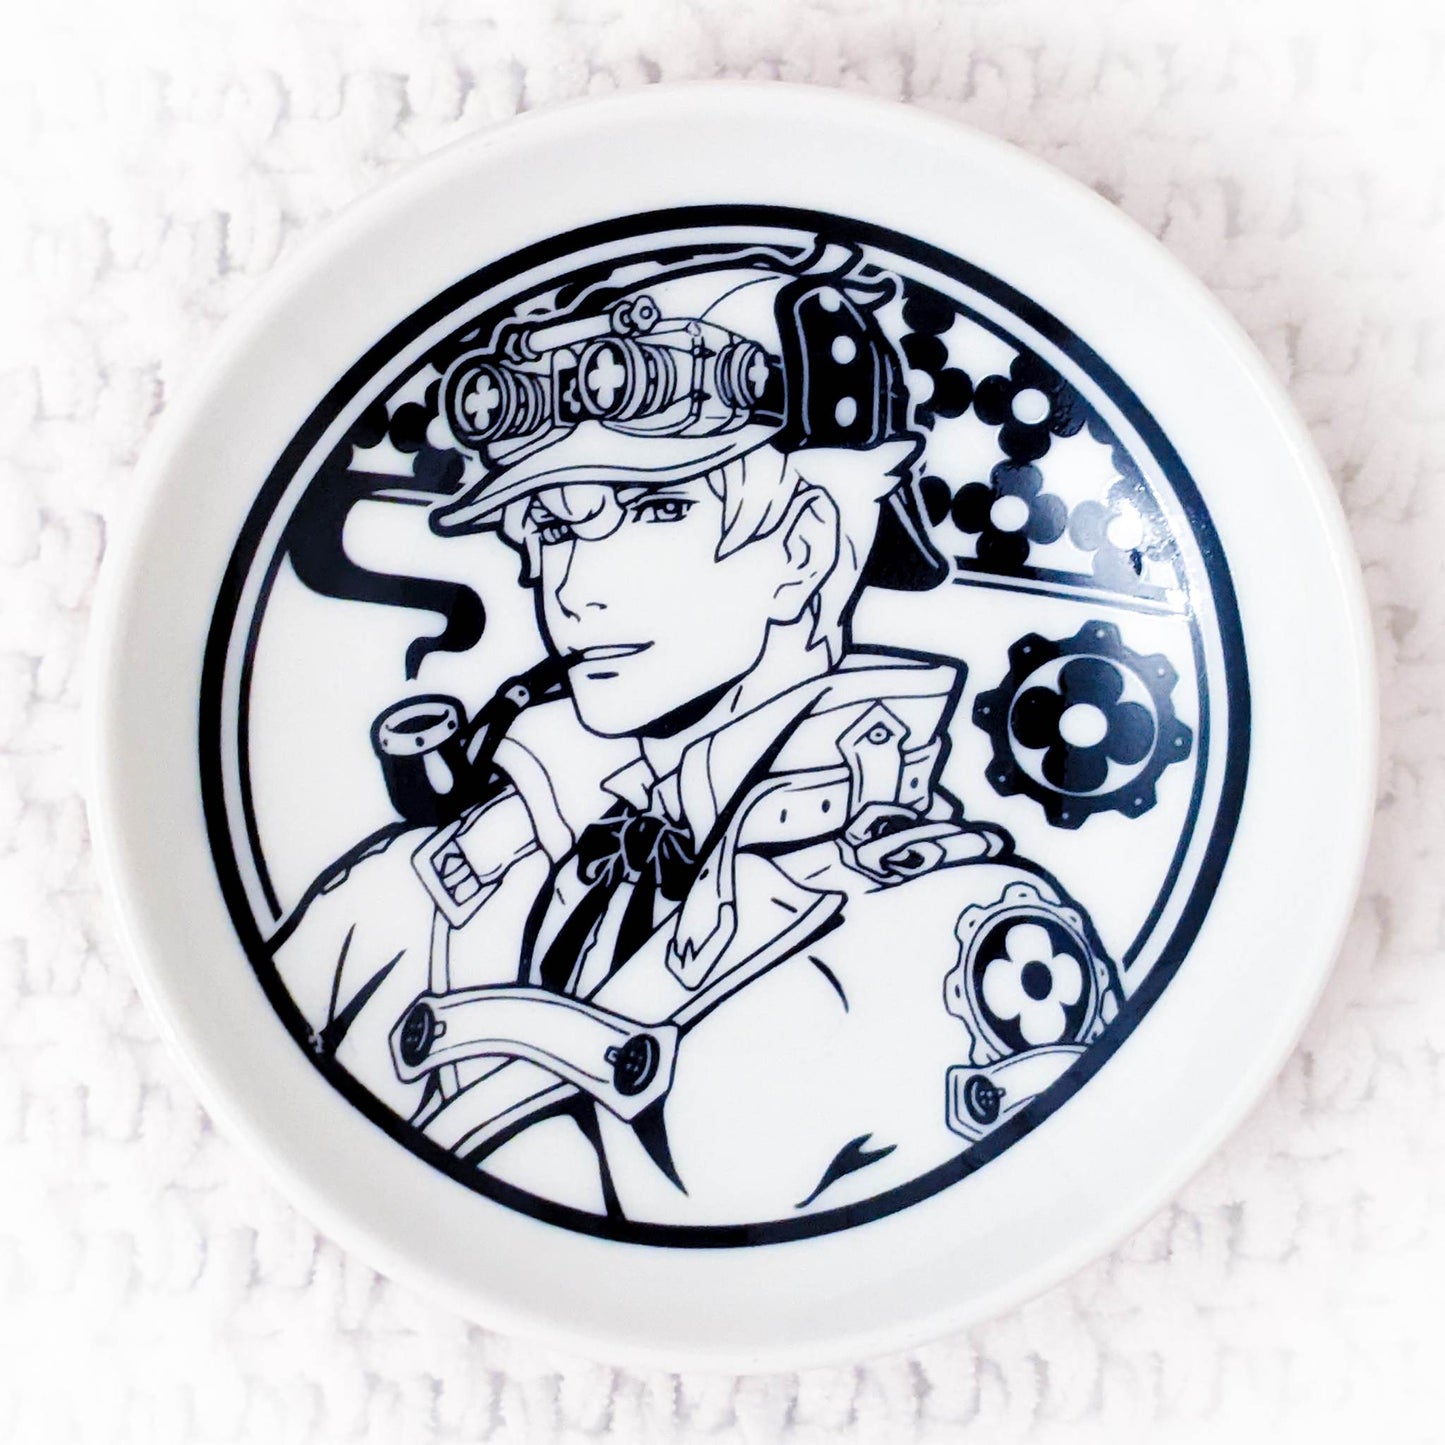 Herlock Sholmes - The Great Ace Attorney Chronicles Orchestra Concert Glass Plate